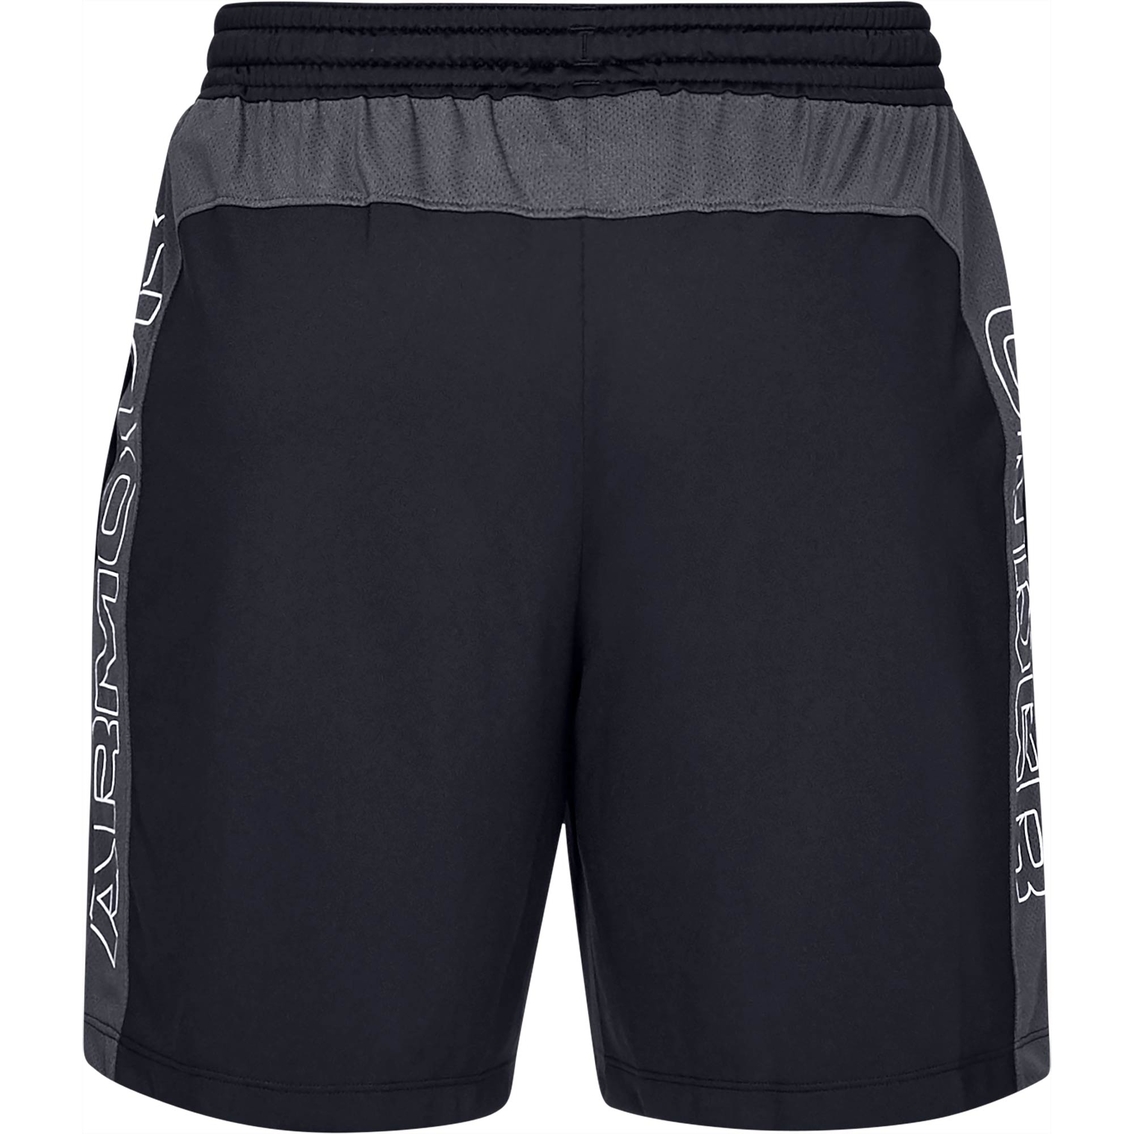 Under Armour MK1 7 in. Wordmark Shorts - Image 2 of 2